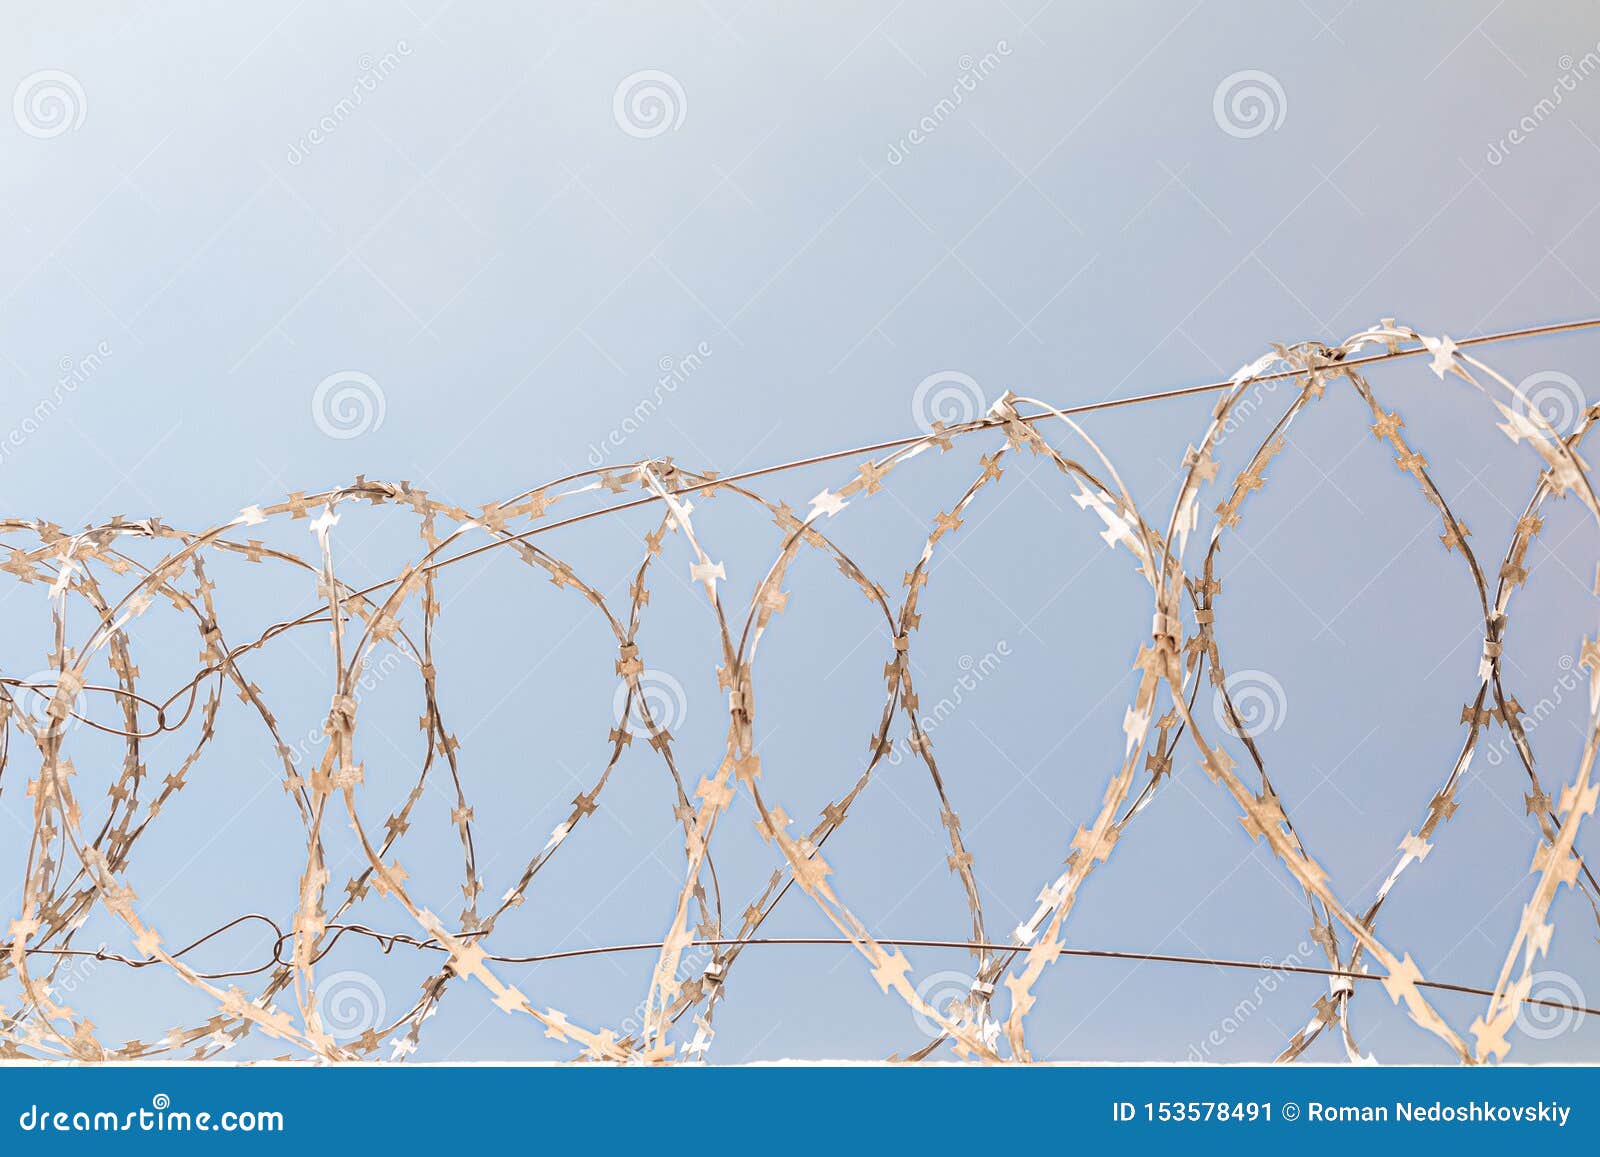 barbed wire on the fence. front view.